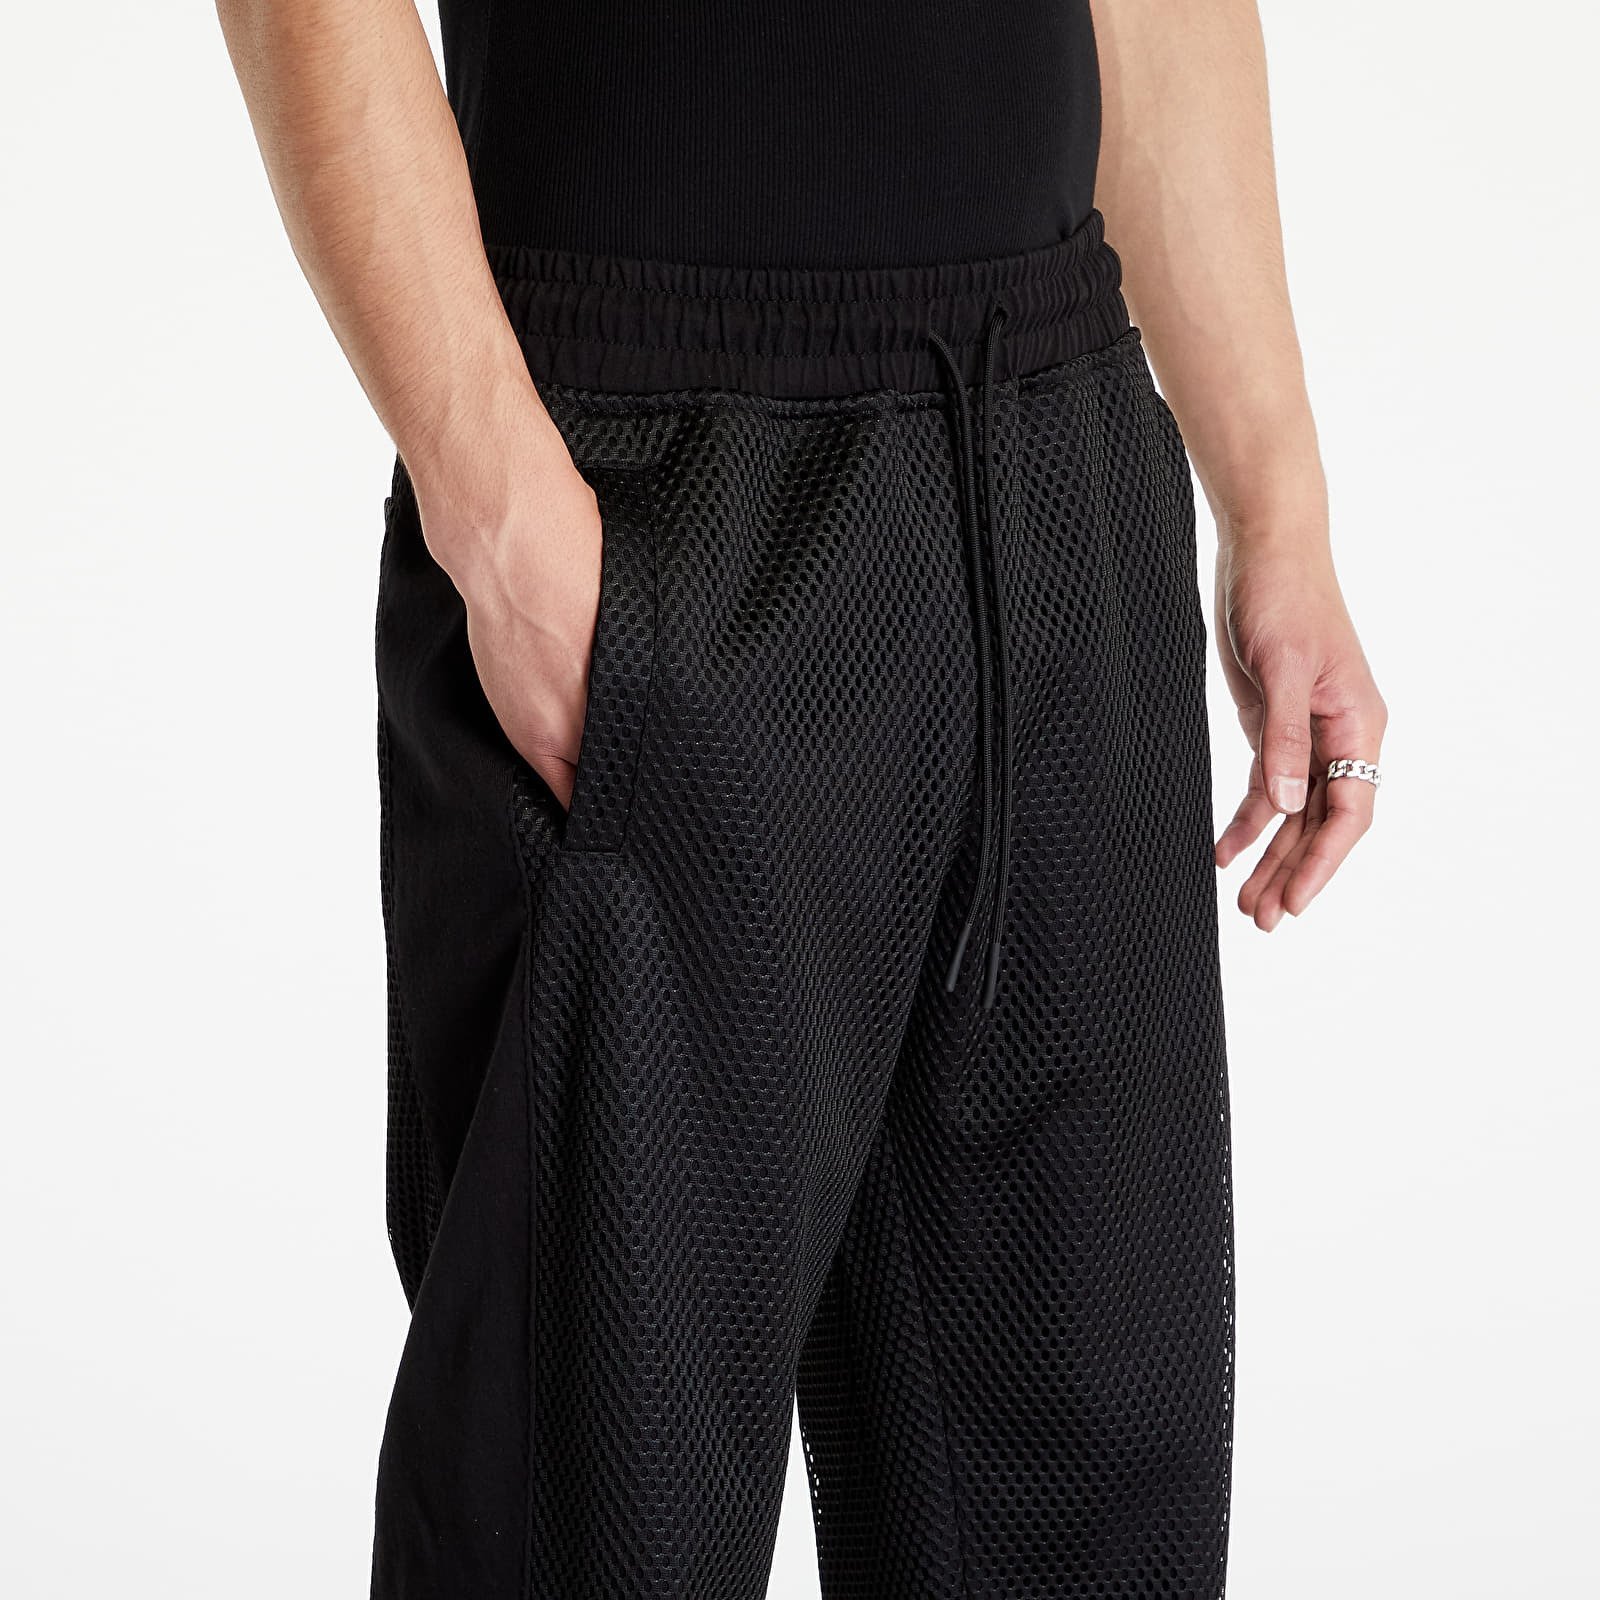 Chicago Track Pant